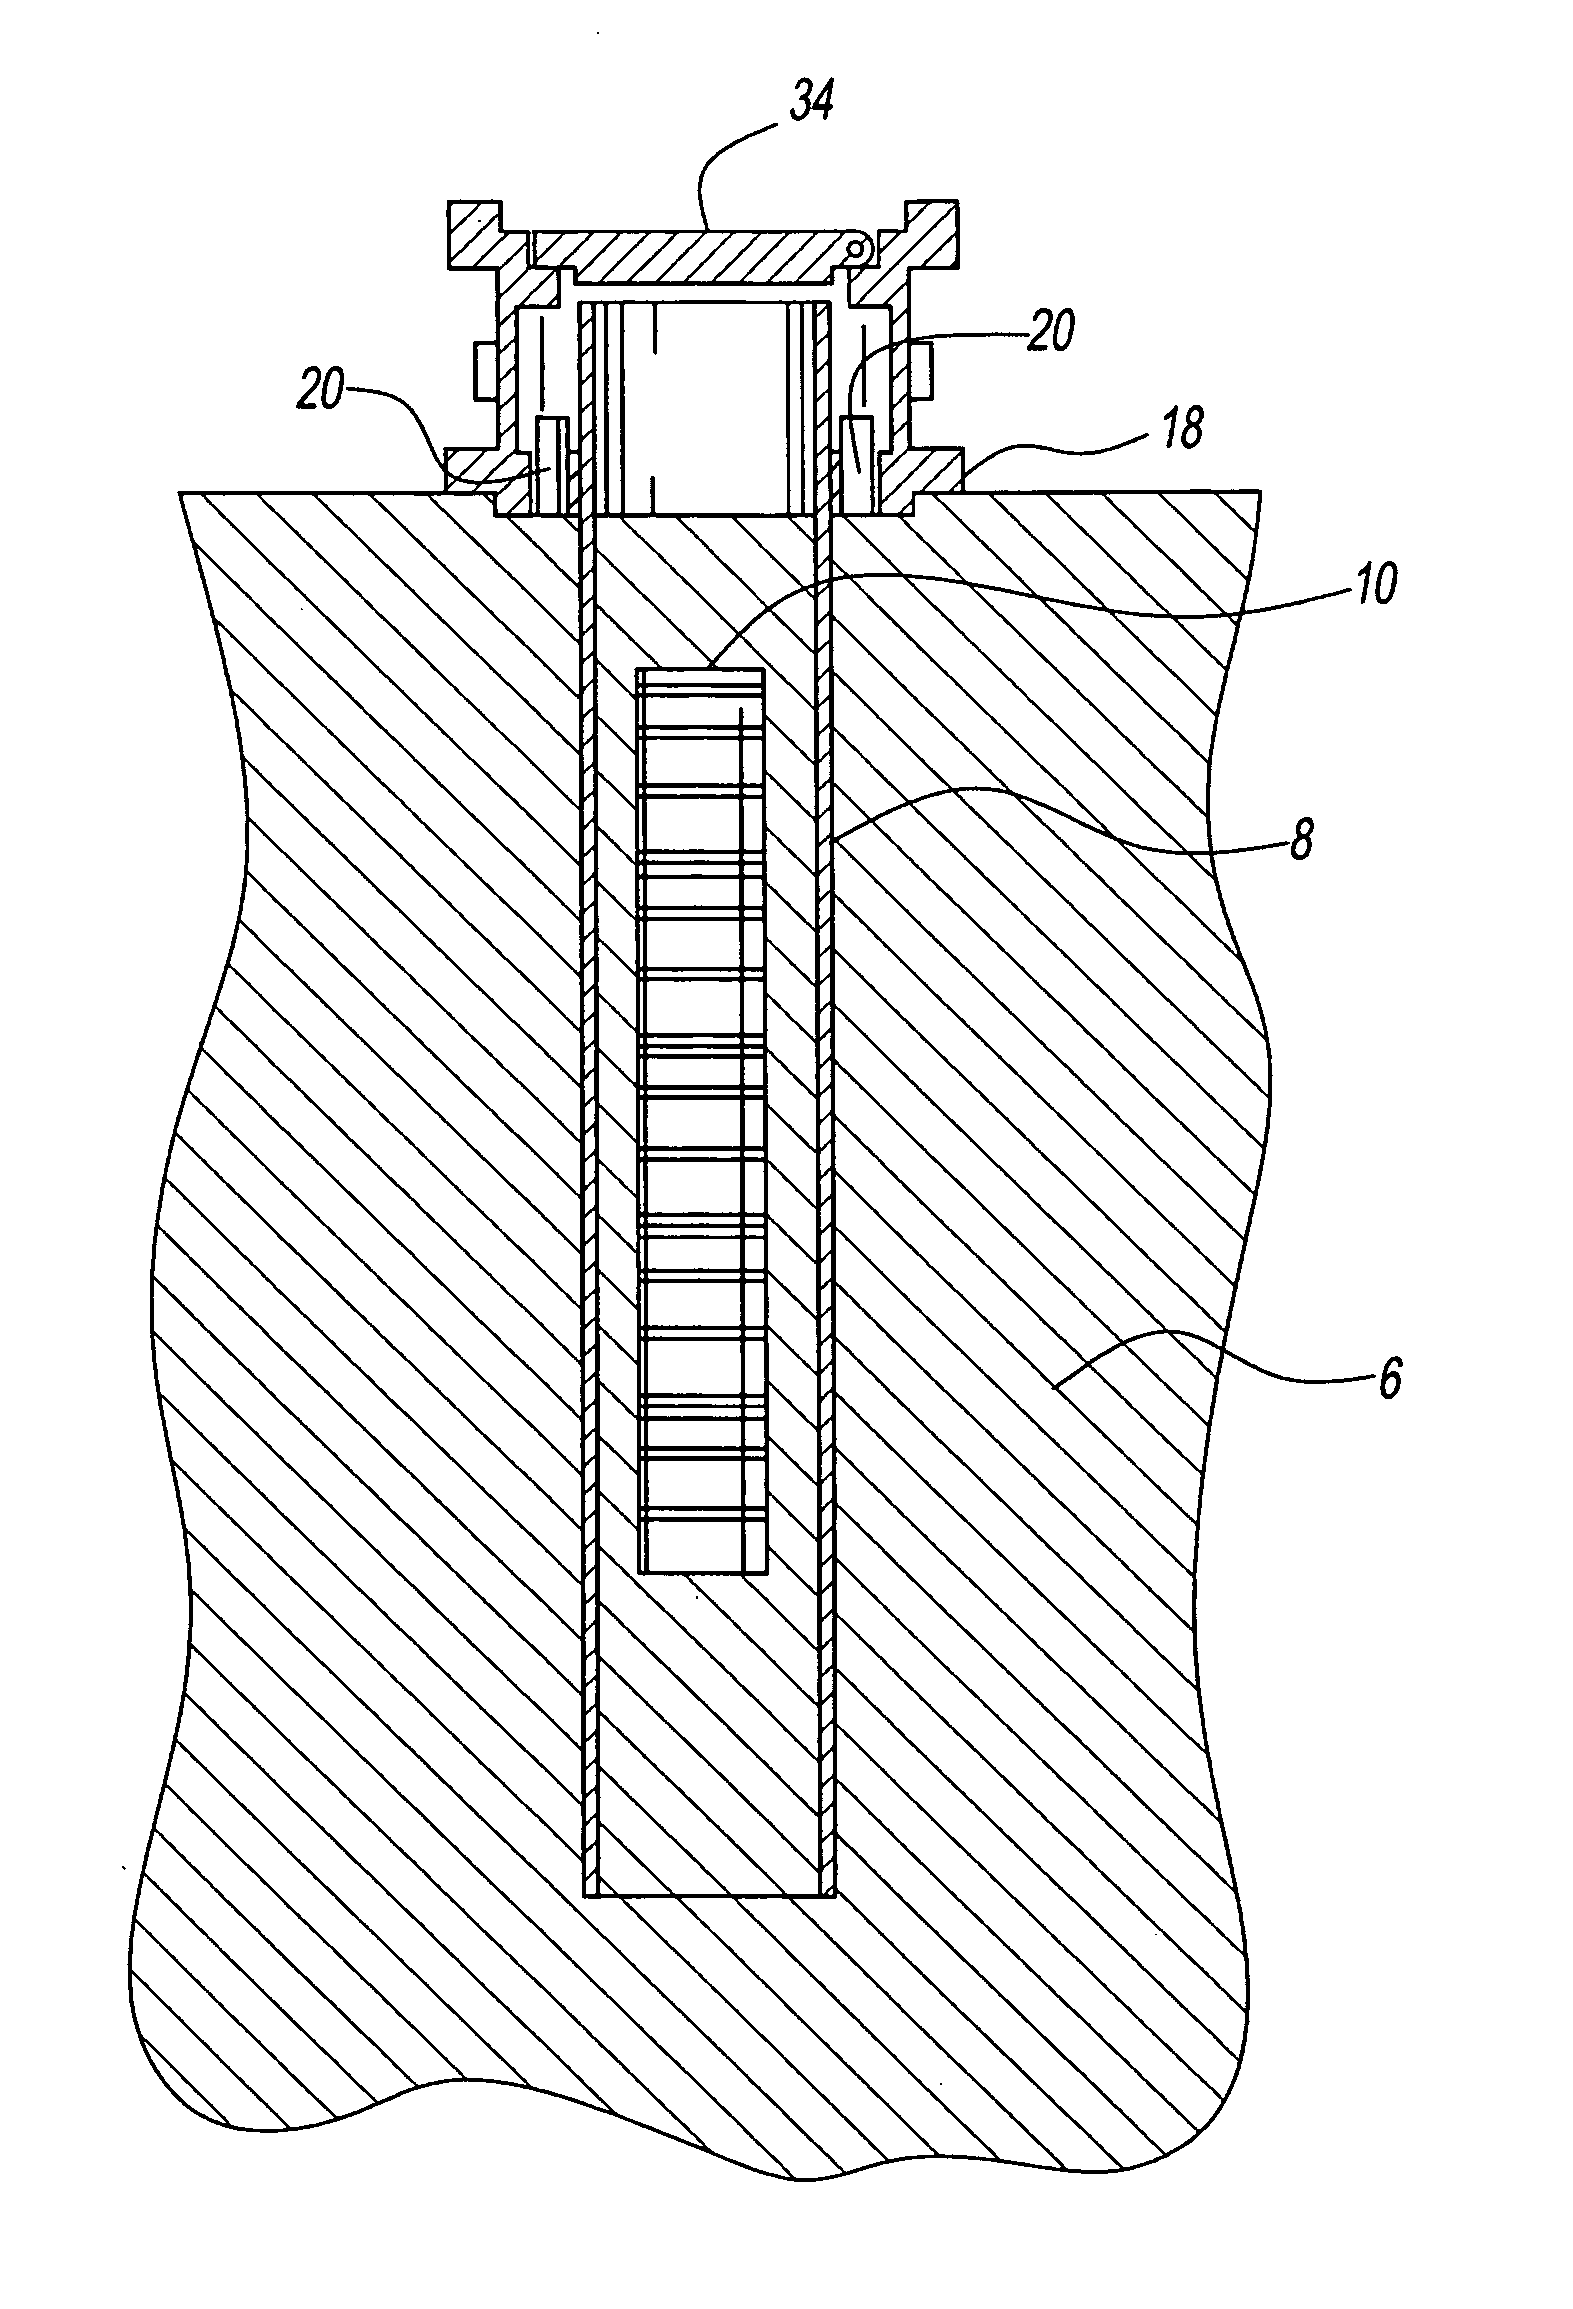 Method and apparatus for identification, stabilization and safe removal of radioactive waste and non hazardous waste contained in buried objects